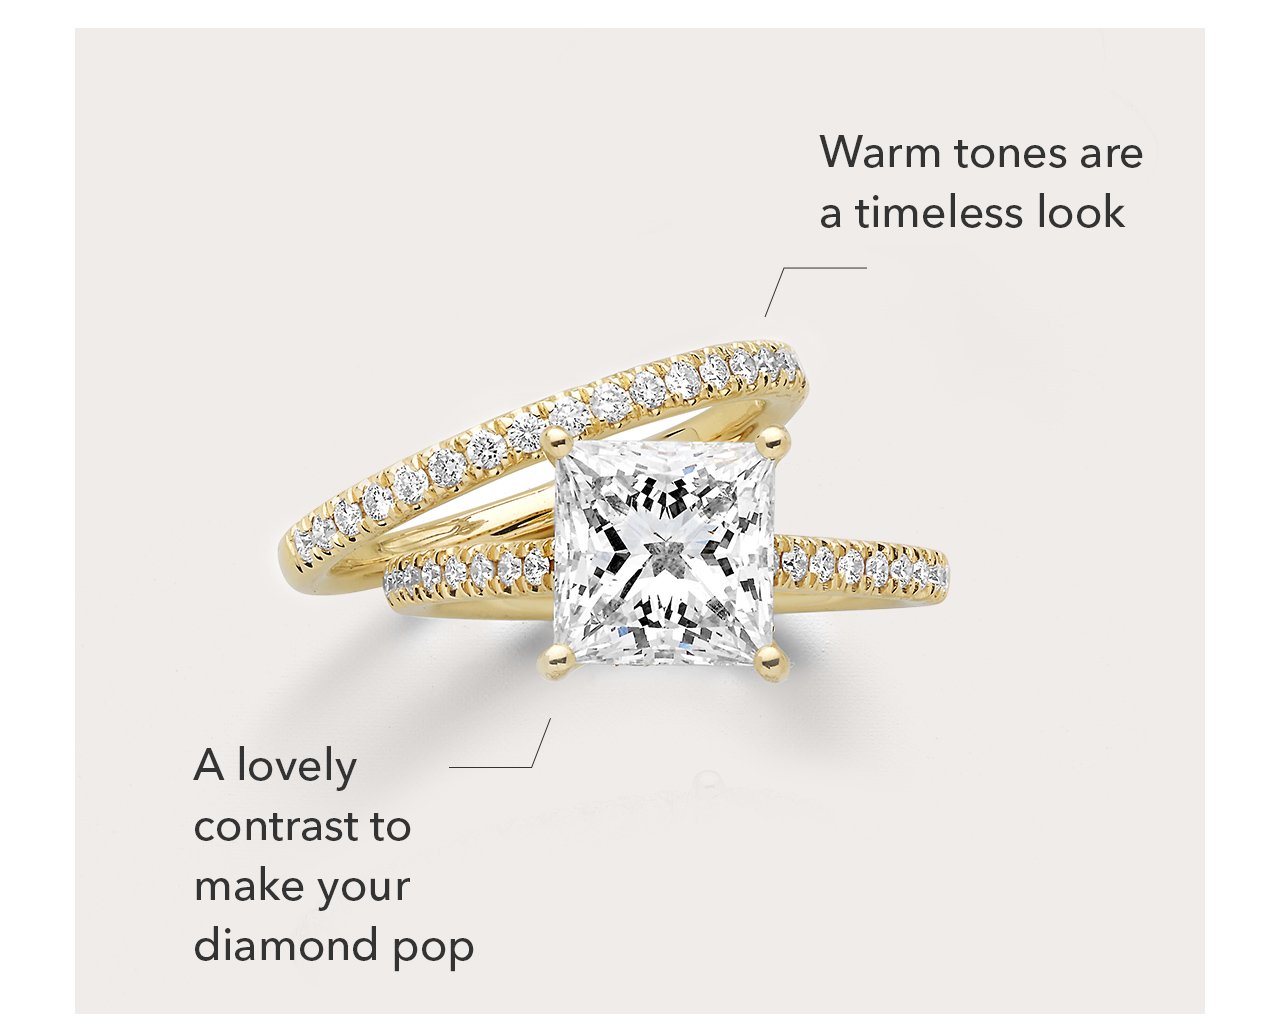 Warm tones are a timeless look | A lovely contrast to make your diamond pop